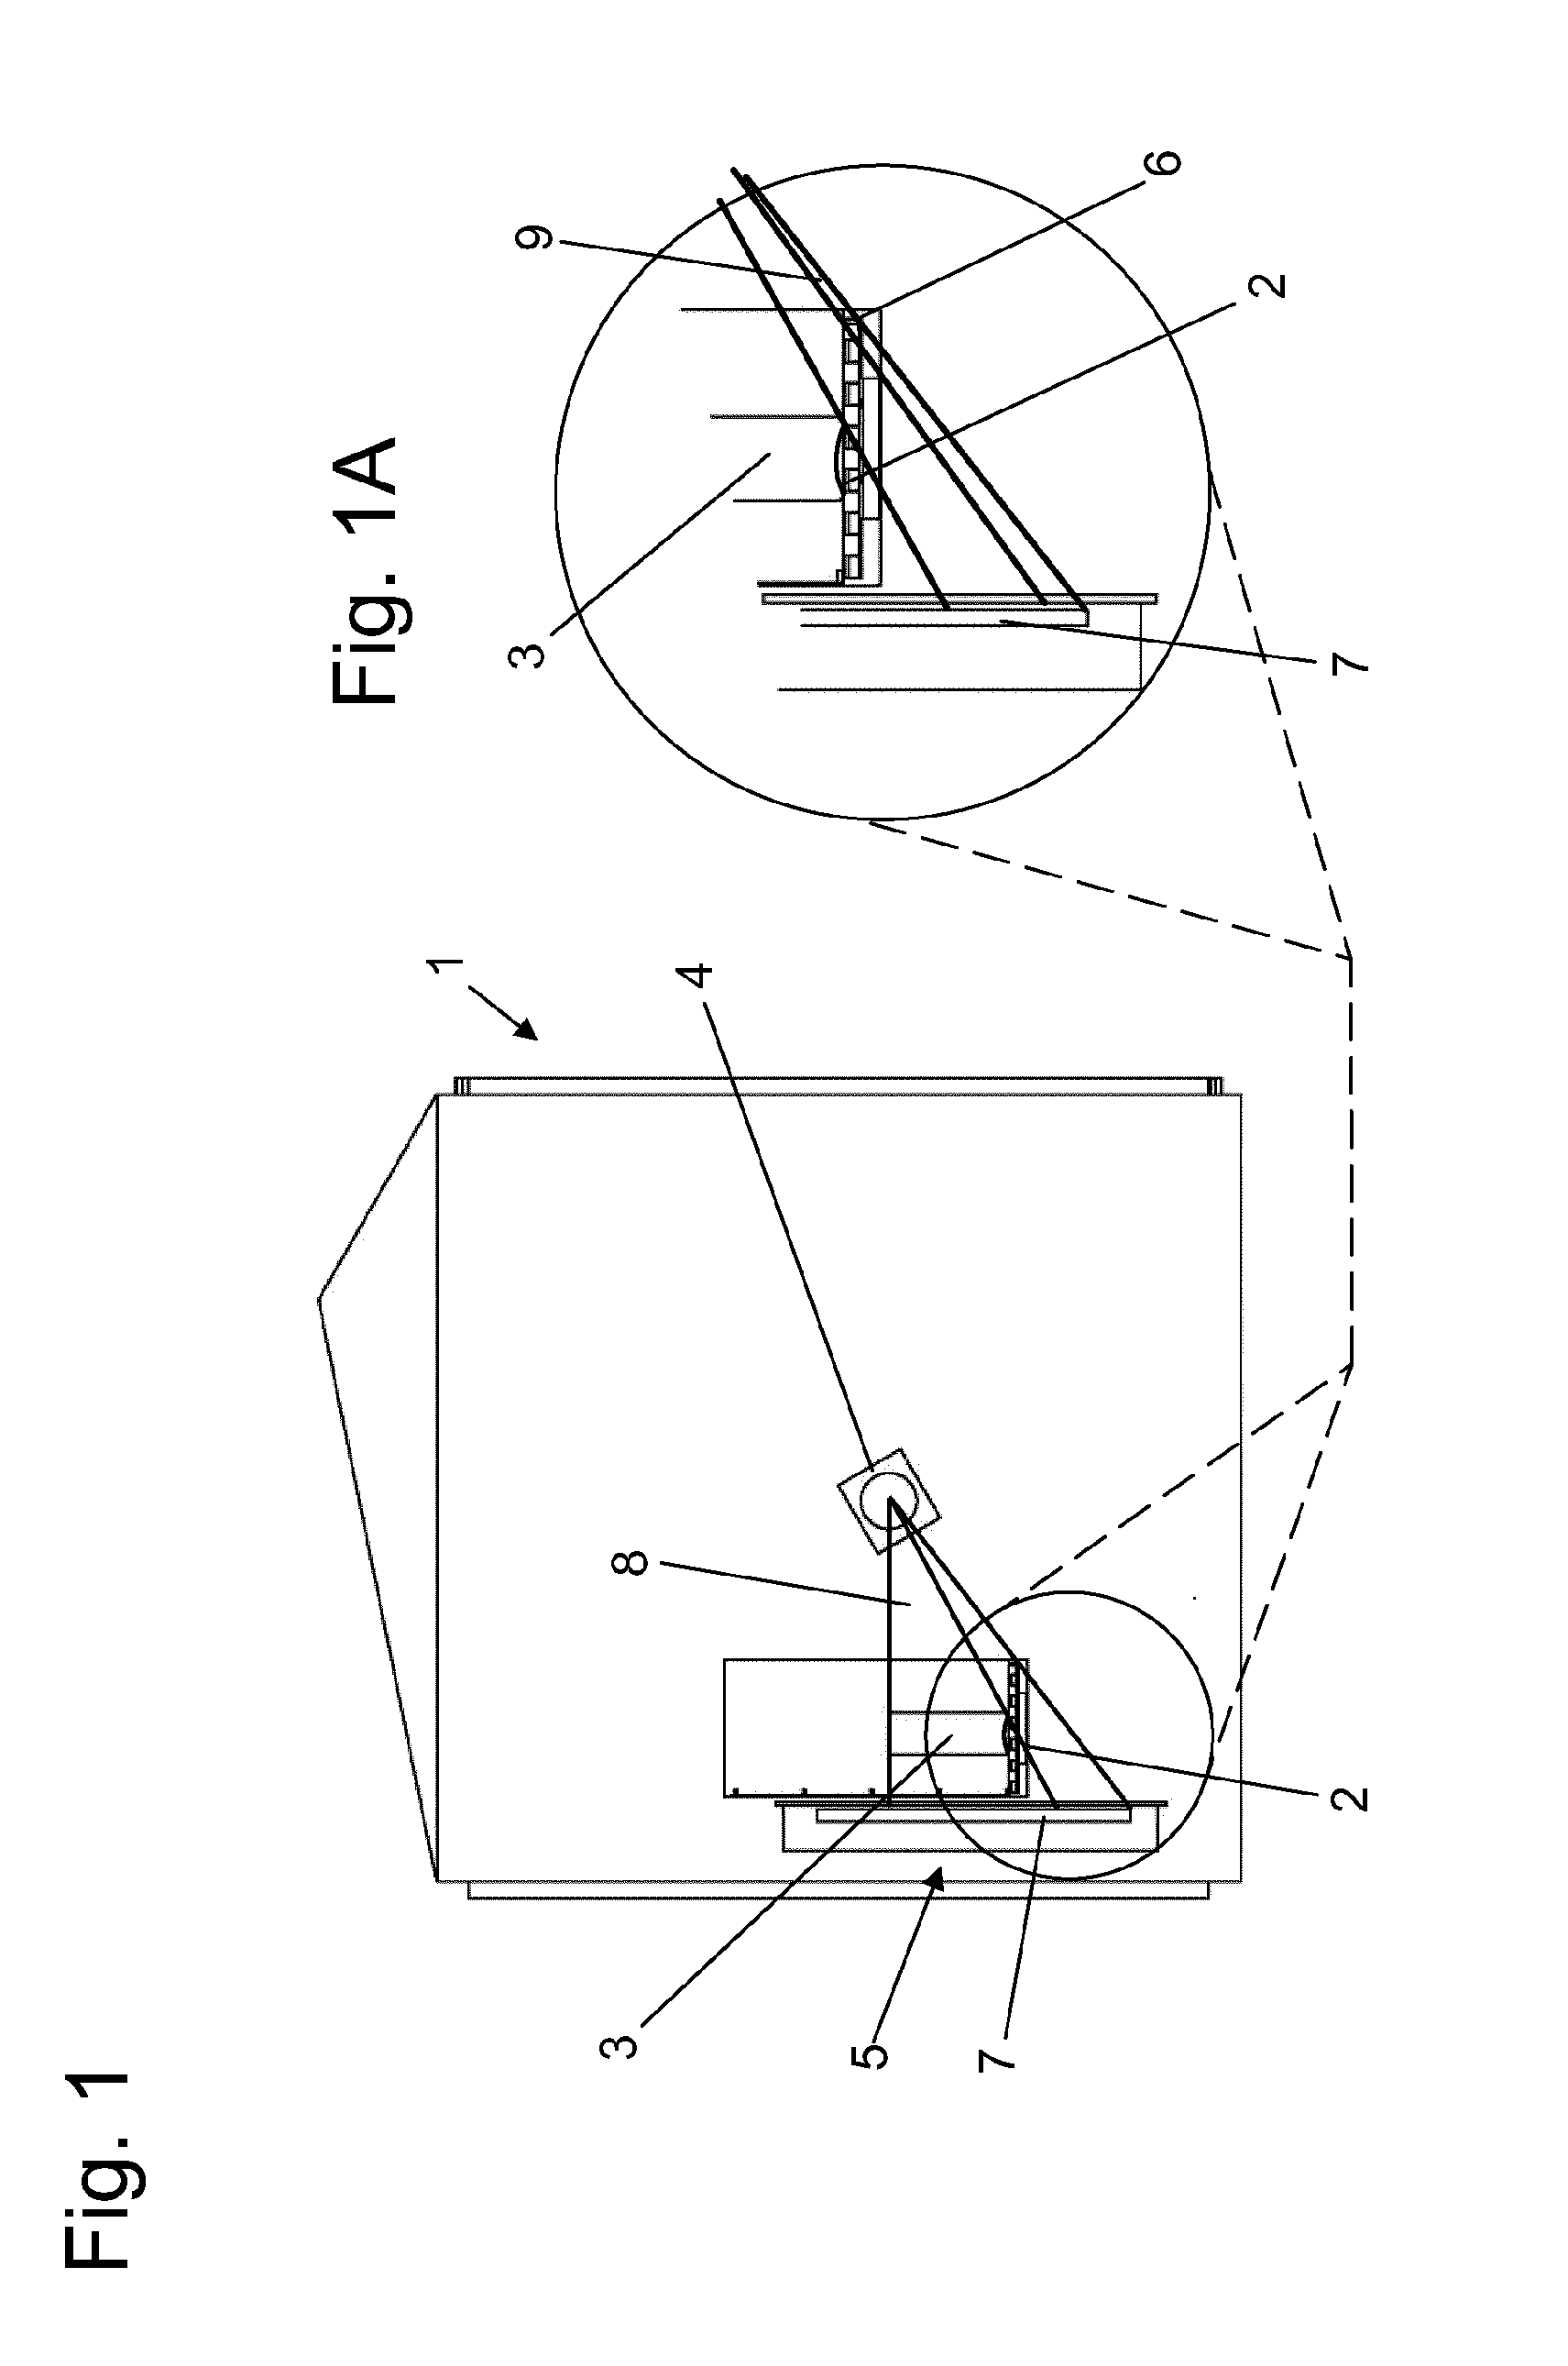 Method of operating a radiographic inspection system with a modular conveyor chain